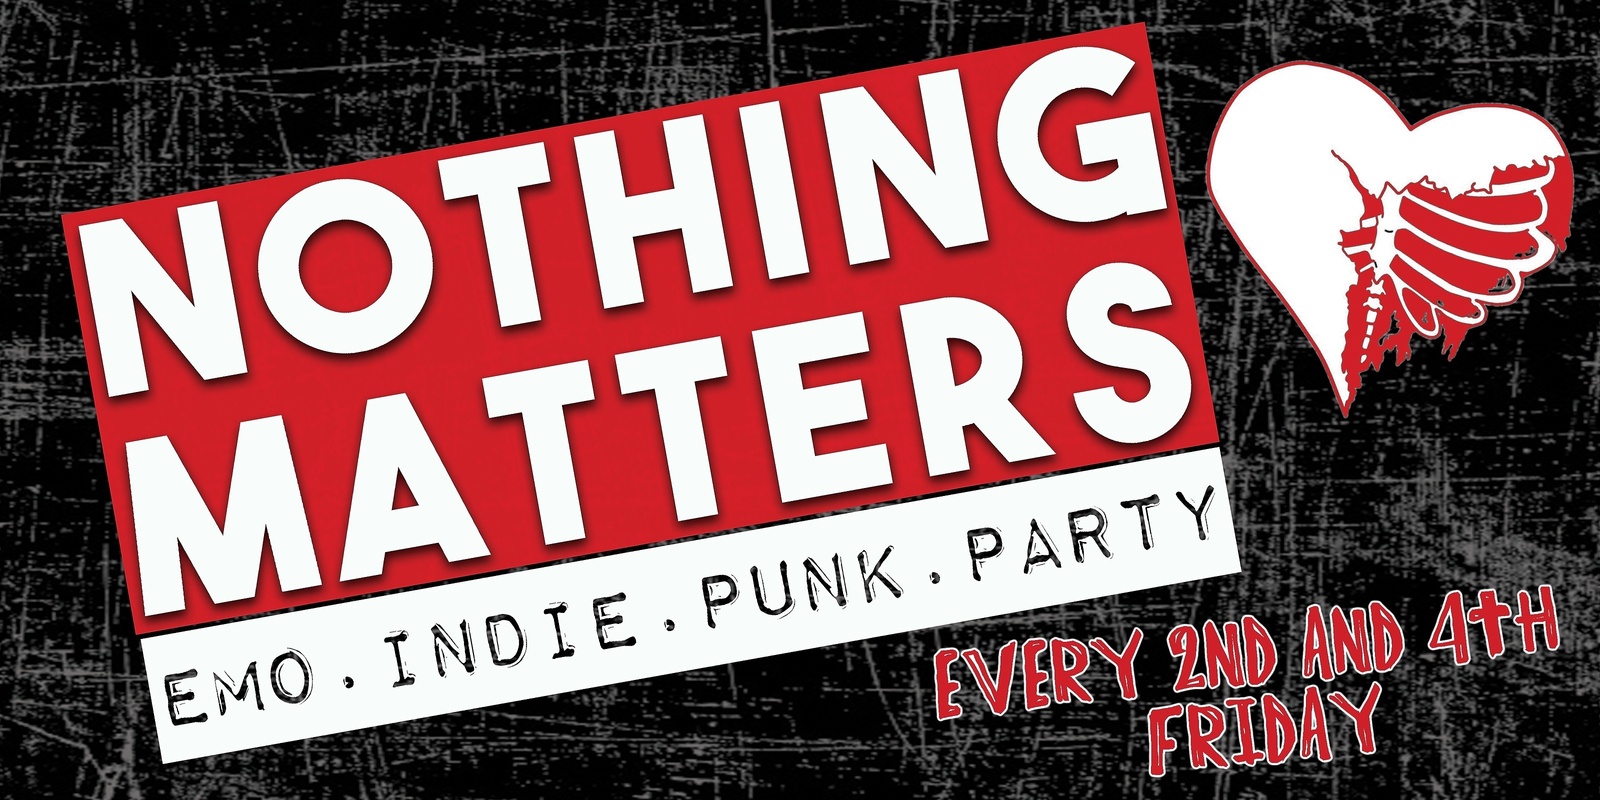 Banner image for NOTHING MATTERS Emo | Indie | Punk | Party